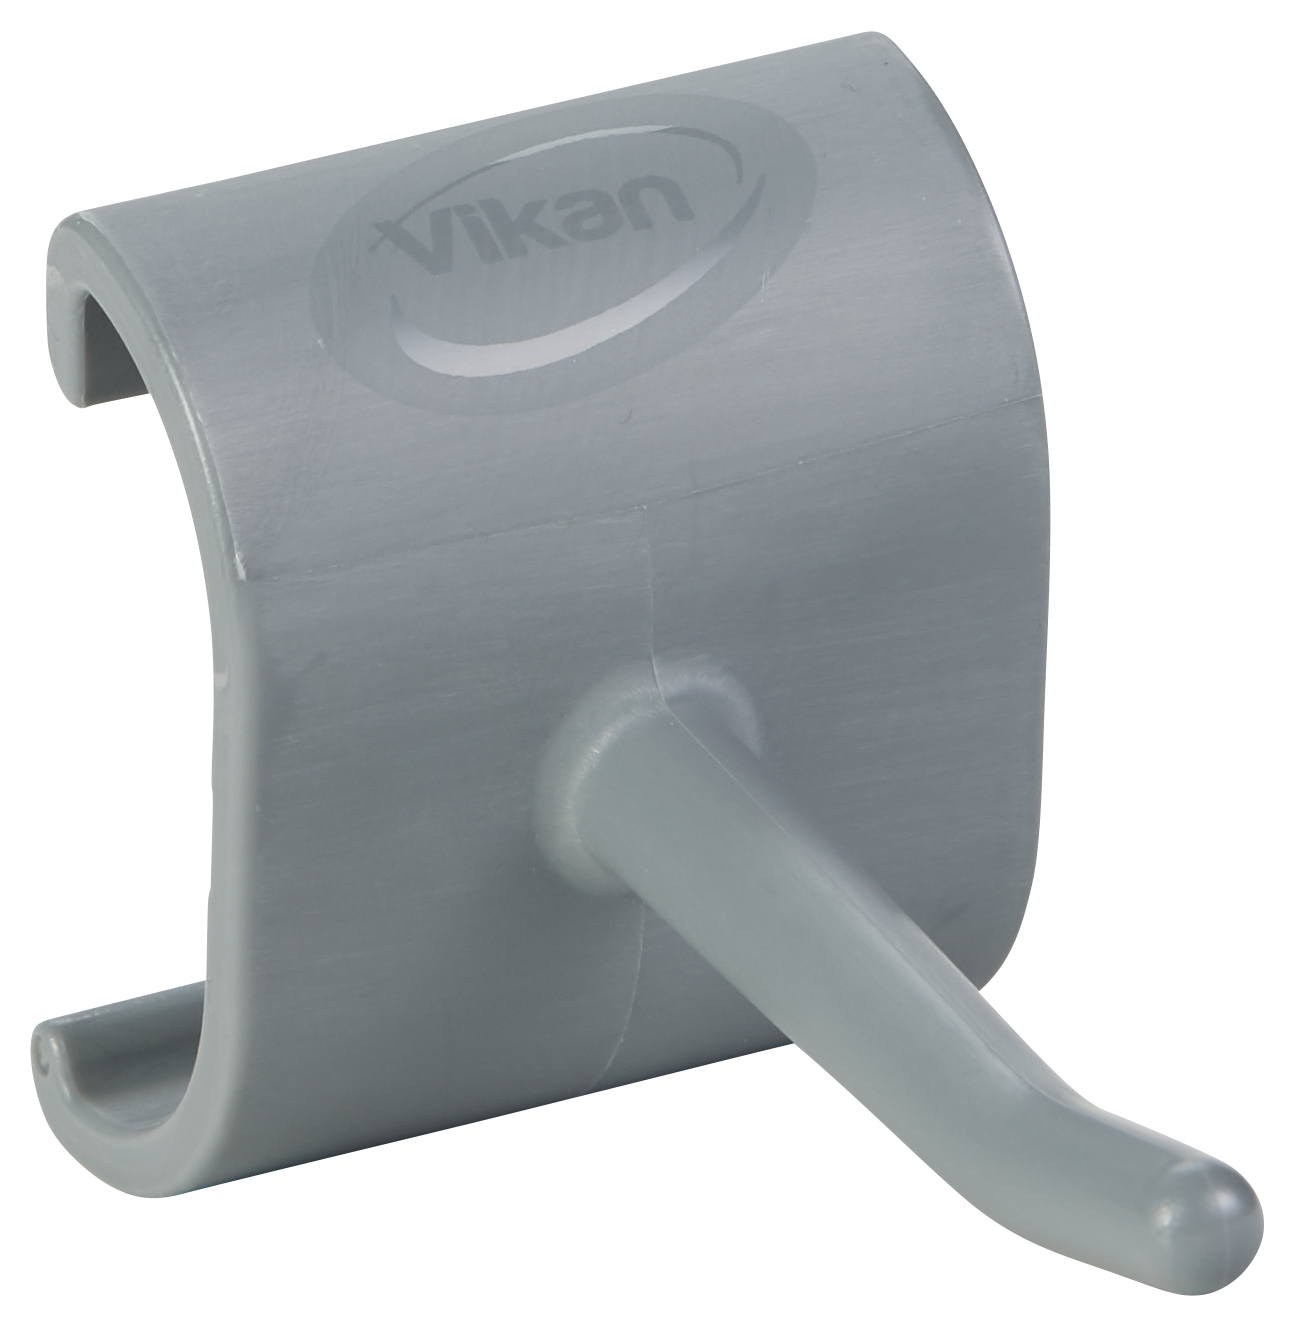 Vikan spare part hook for 1011x, 1012x & 1014x, Grey